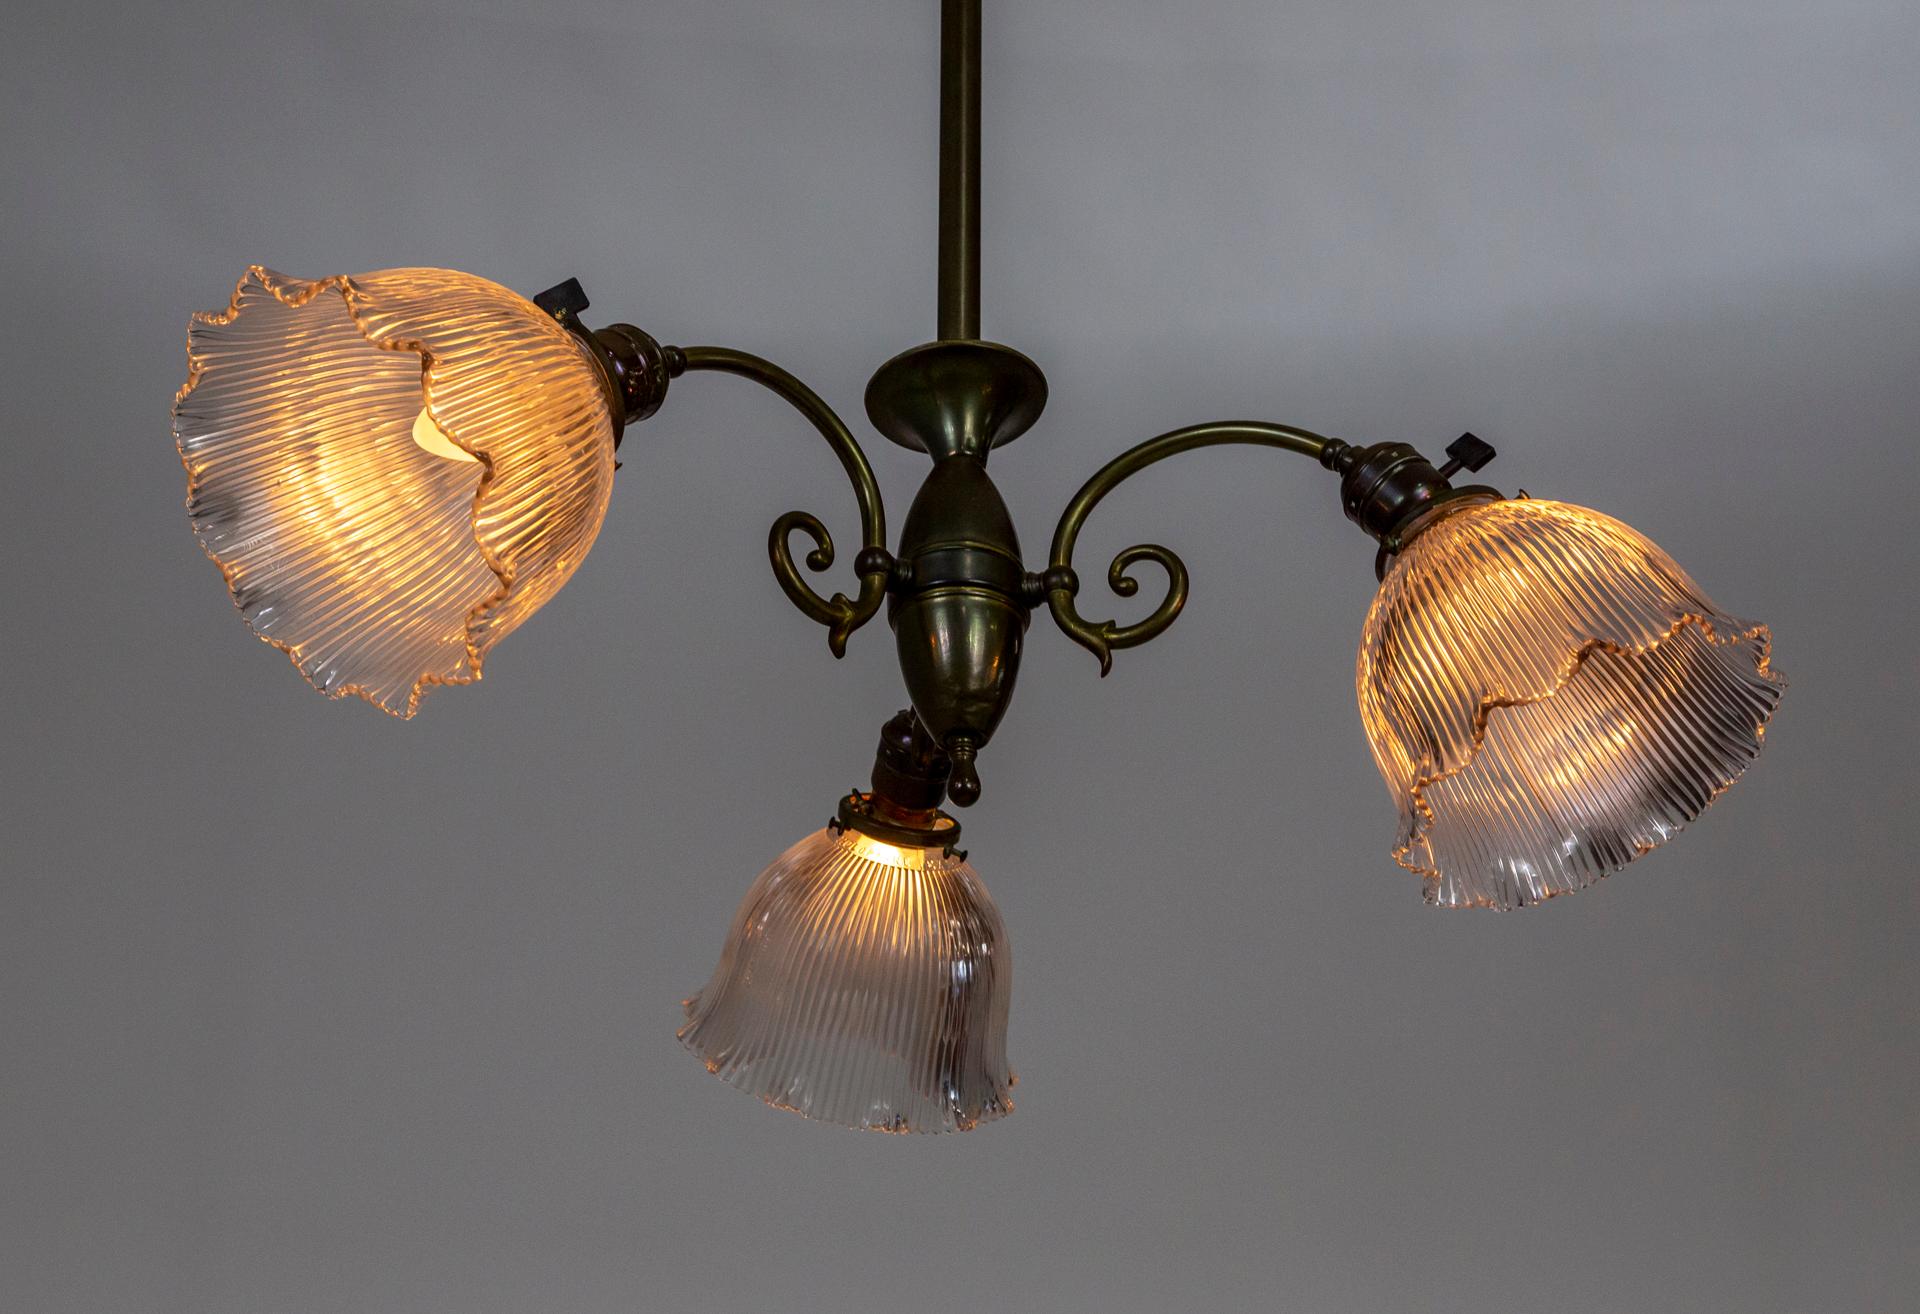 A rich, deep patinated brass chandelier and three curled arms with down lights. A simple, elegant design with ruffled bell shape, holophane glass shades. With switches on the sockets. Newly wired. Shades are marked 